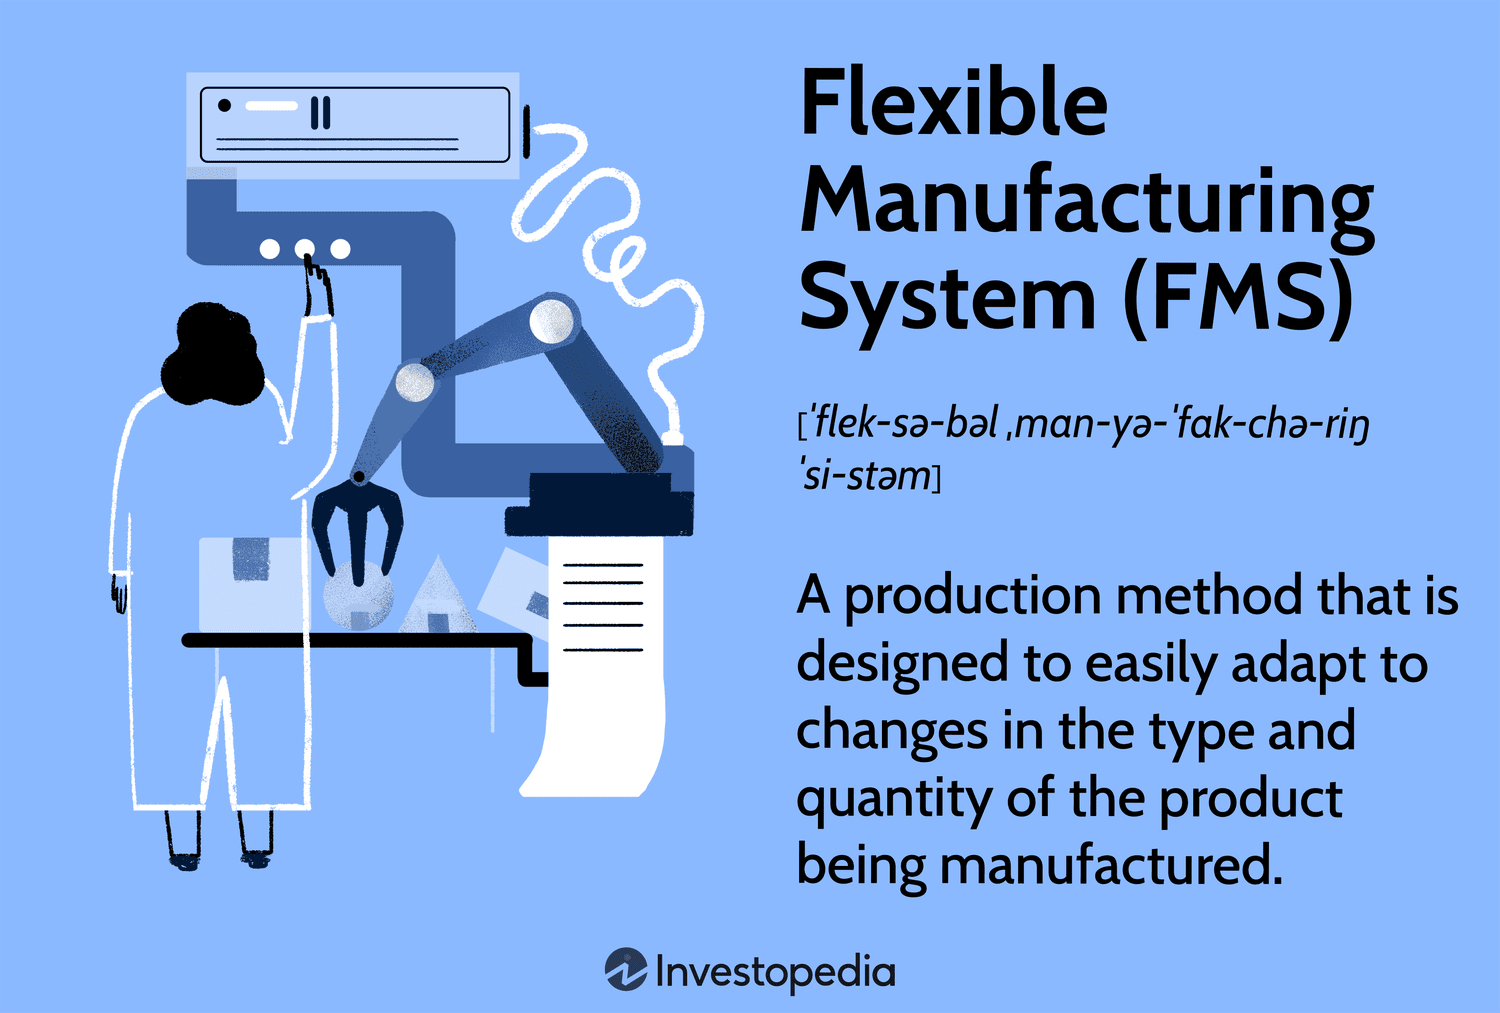 Flexible Manufacturing System (FMS): A production method that is designed to easily adapt to changes in the type and quantity of the product being manufactured.